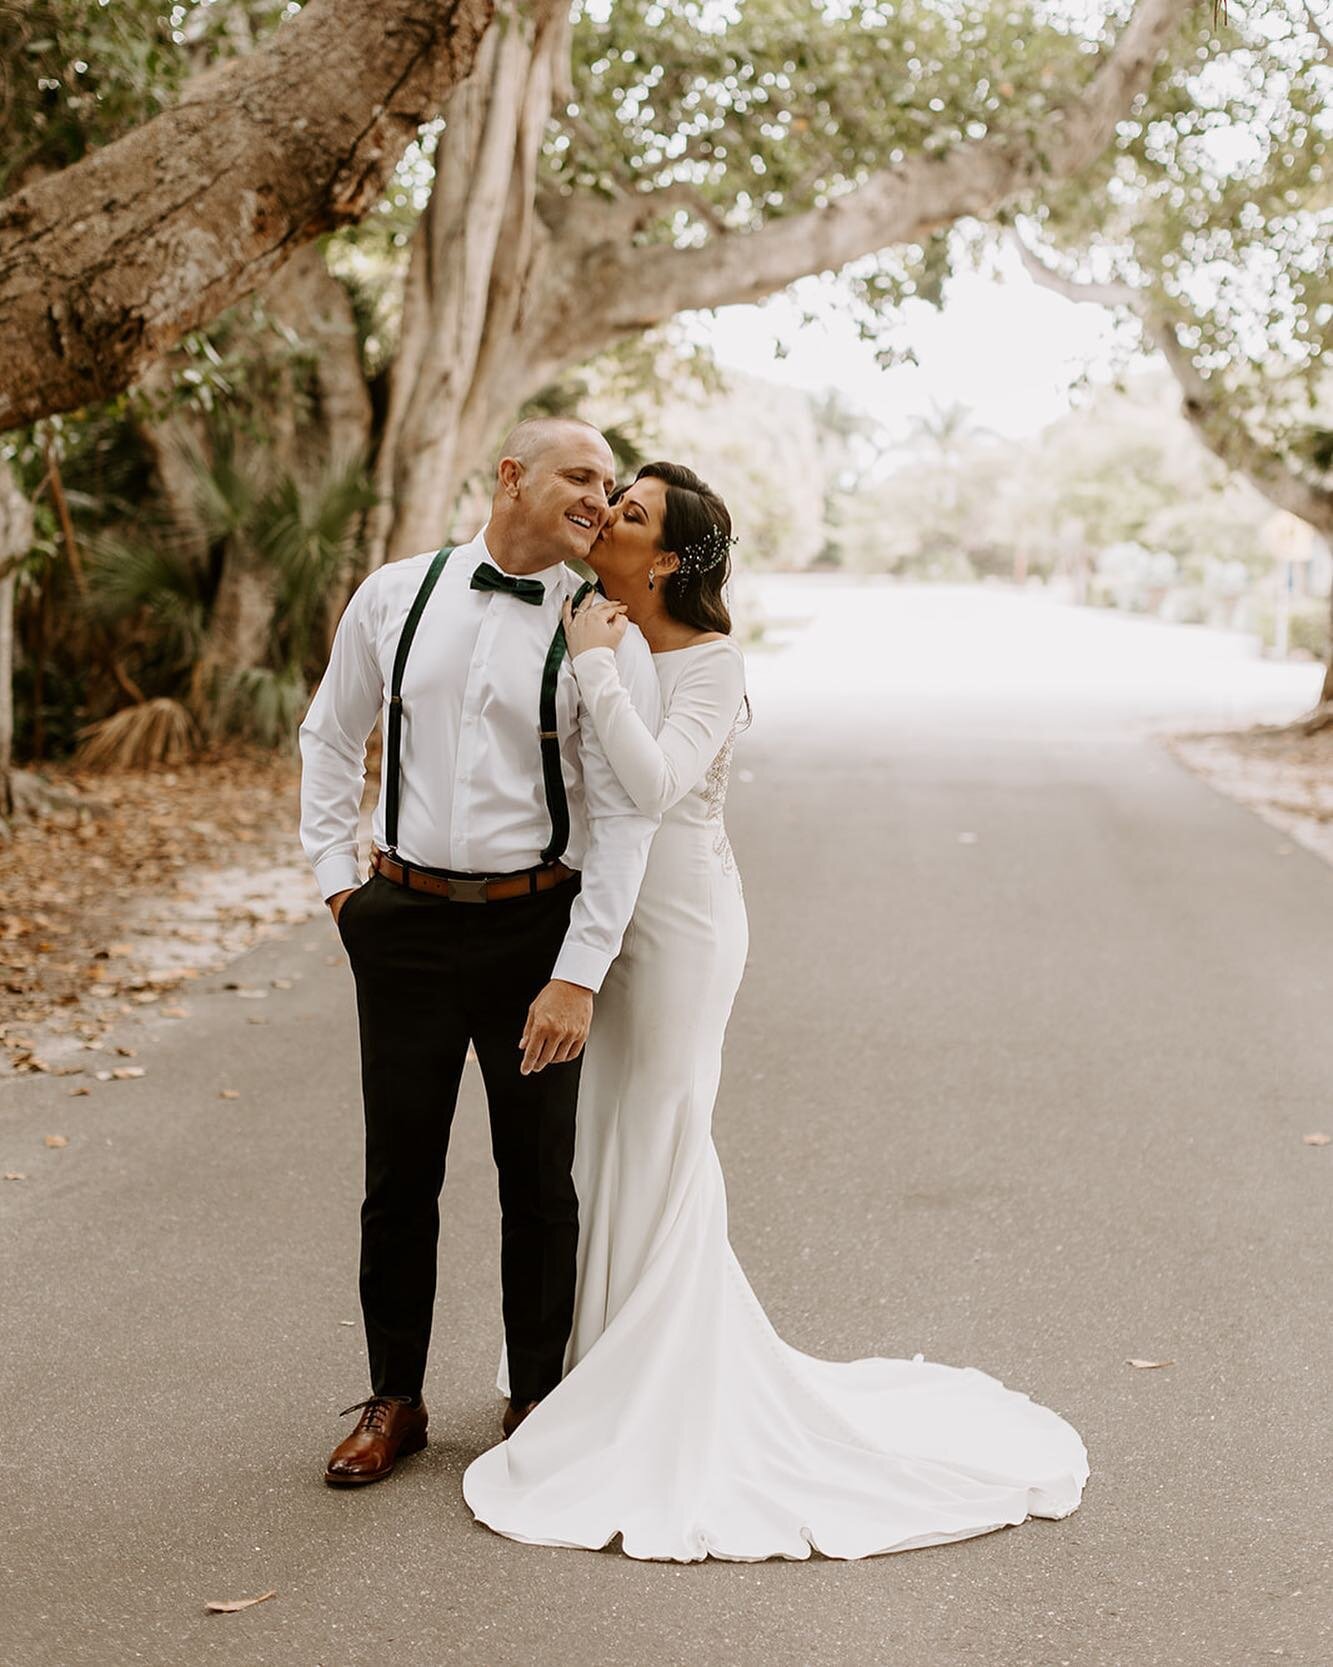 Just shot my last wedding of the year and feeling extra grateful. ⁣🎁
⁣
I was driving back from Boca Grande Monday and found myself in tears for a good portion of my drive home. I was reflecting on the past year and realized that 2020 has taught me o